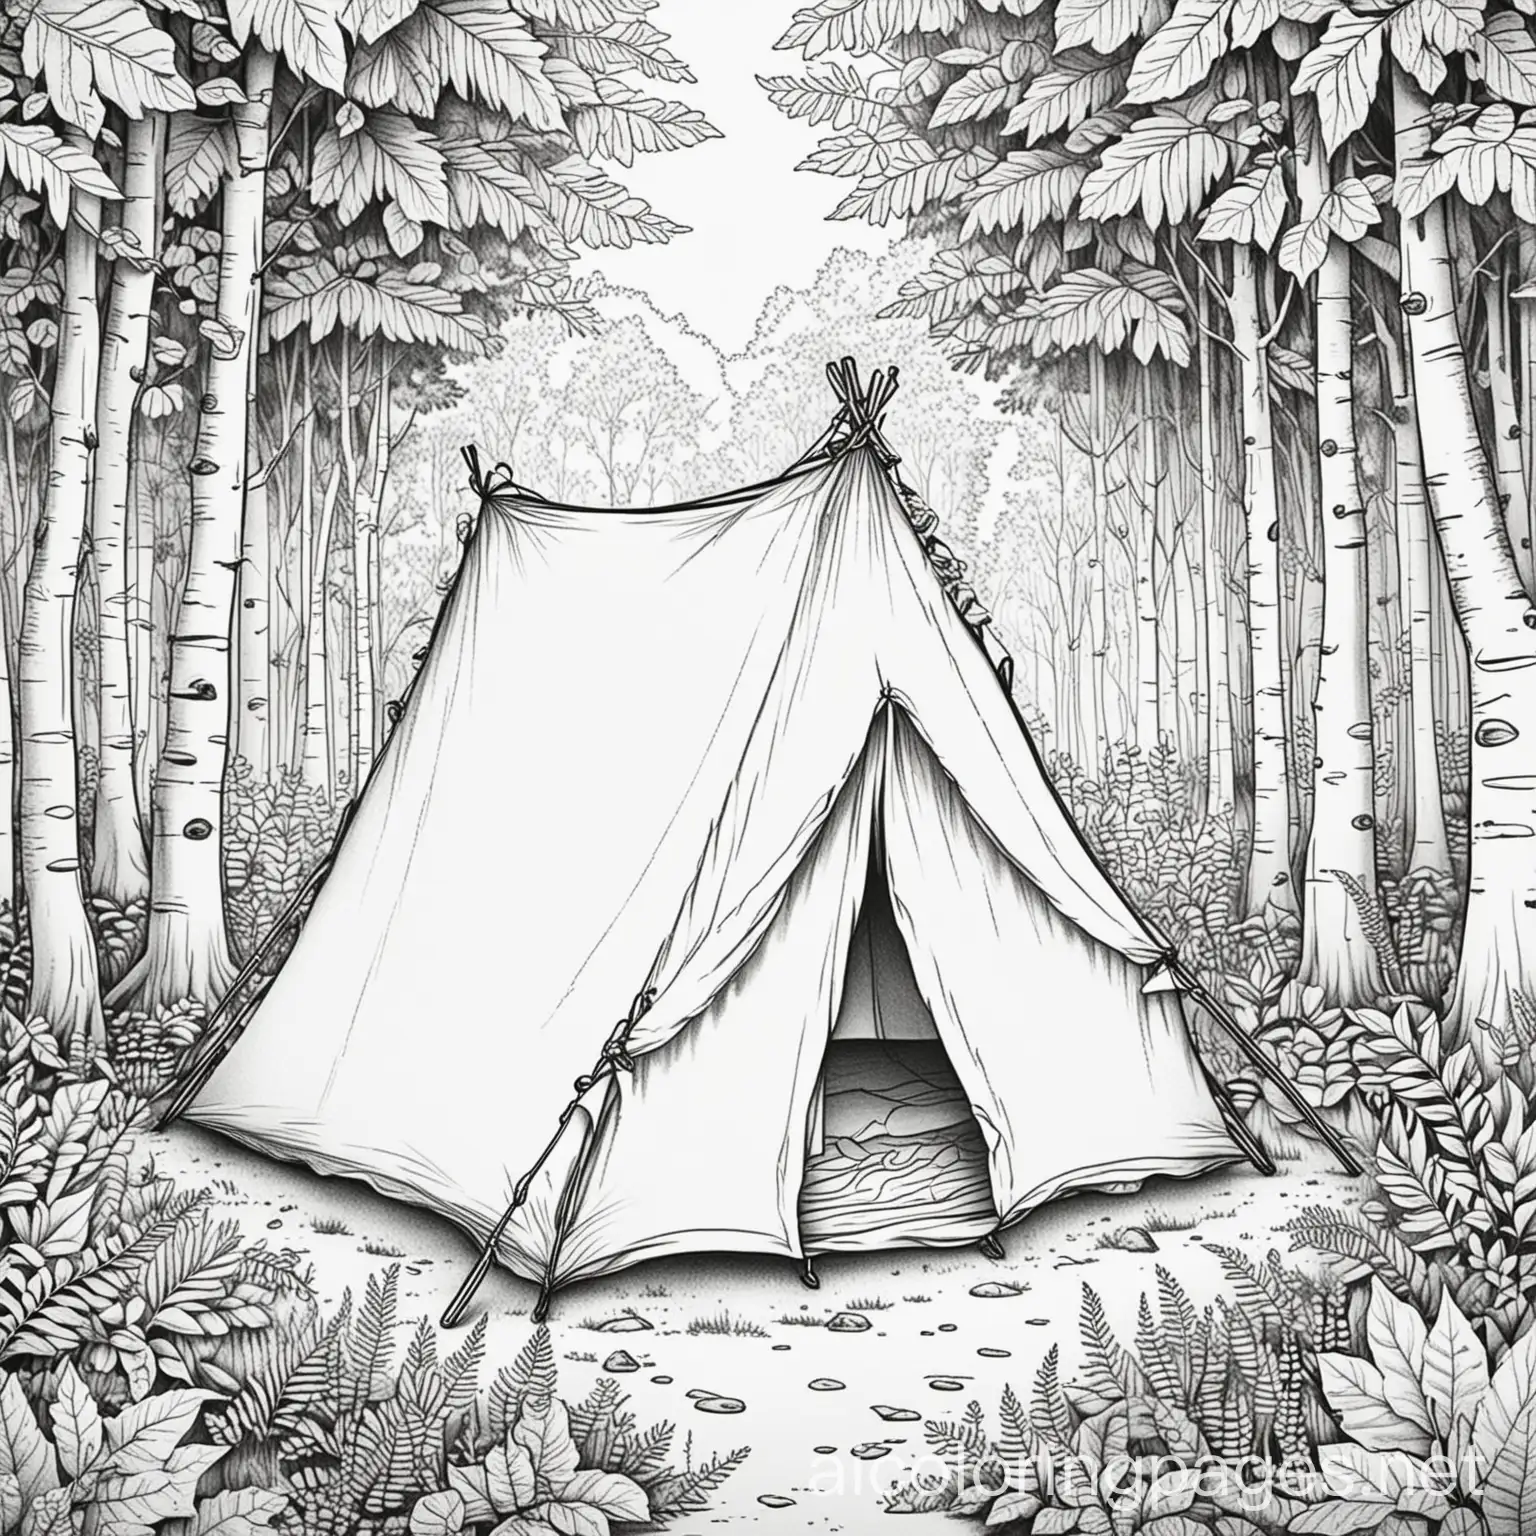 a Cute tent in a forest and nature for adults , Coloring Page, black and white, line art, white background, Simplicity, Ample White Space. The background of the coloring page is plain white. The outlines of all the subjects are easy to distinguish, making it simple to color without too much difficulty, lots of patterns, boho style, Coloring Page, black and white, line art, white background, Simplicity, Ample White Space. The background of the coloring page is plain white to make it easy for young children to color within the lines. The outlines of all the subjects are easy to distinguish, making it simple for kids to color without too much difficulty